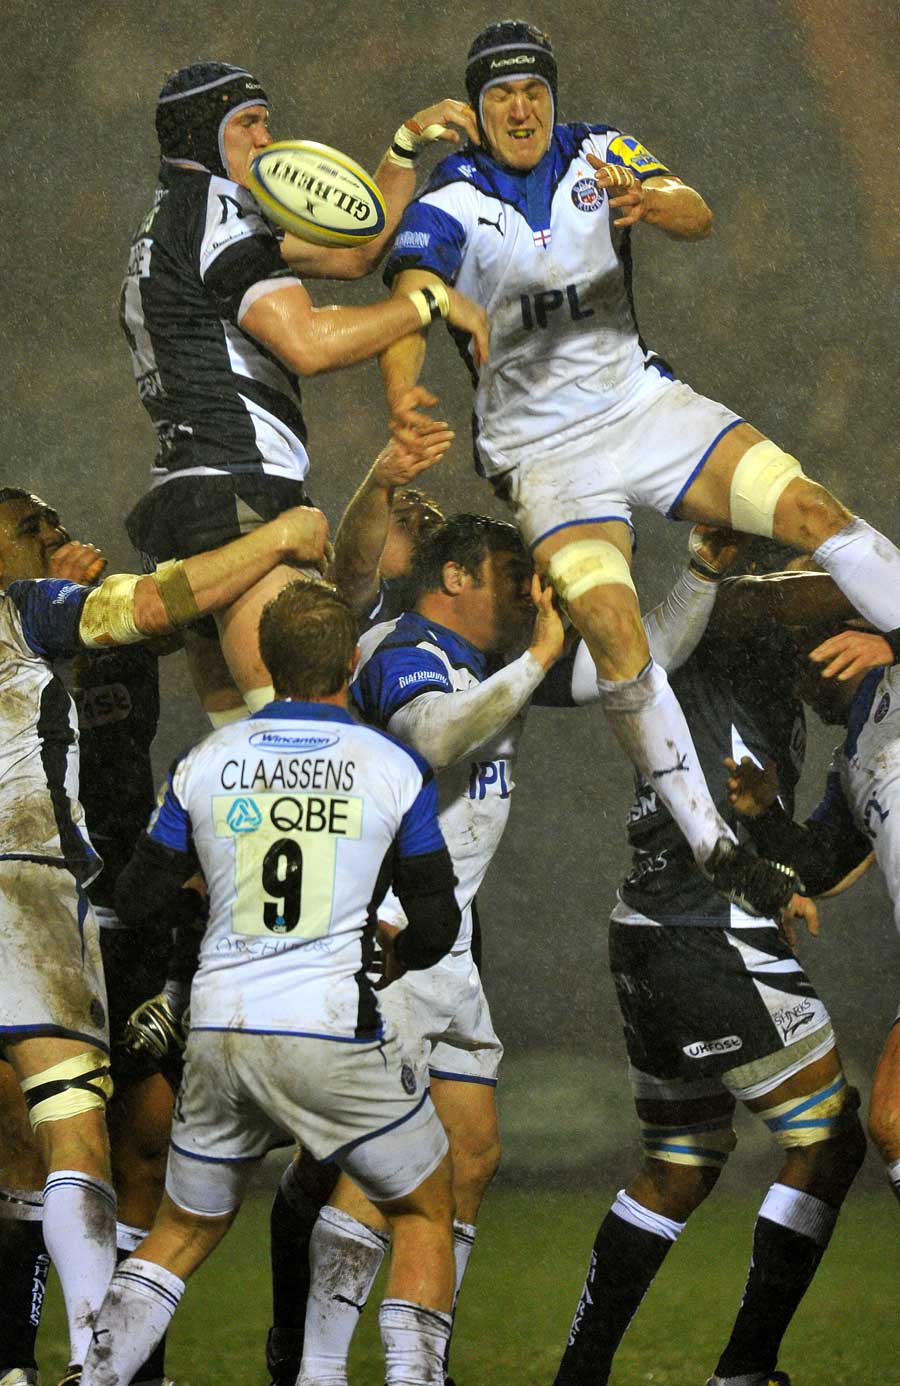 Sale's Chris Jones and Bath's Ben Skirving compete for the ball